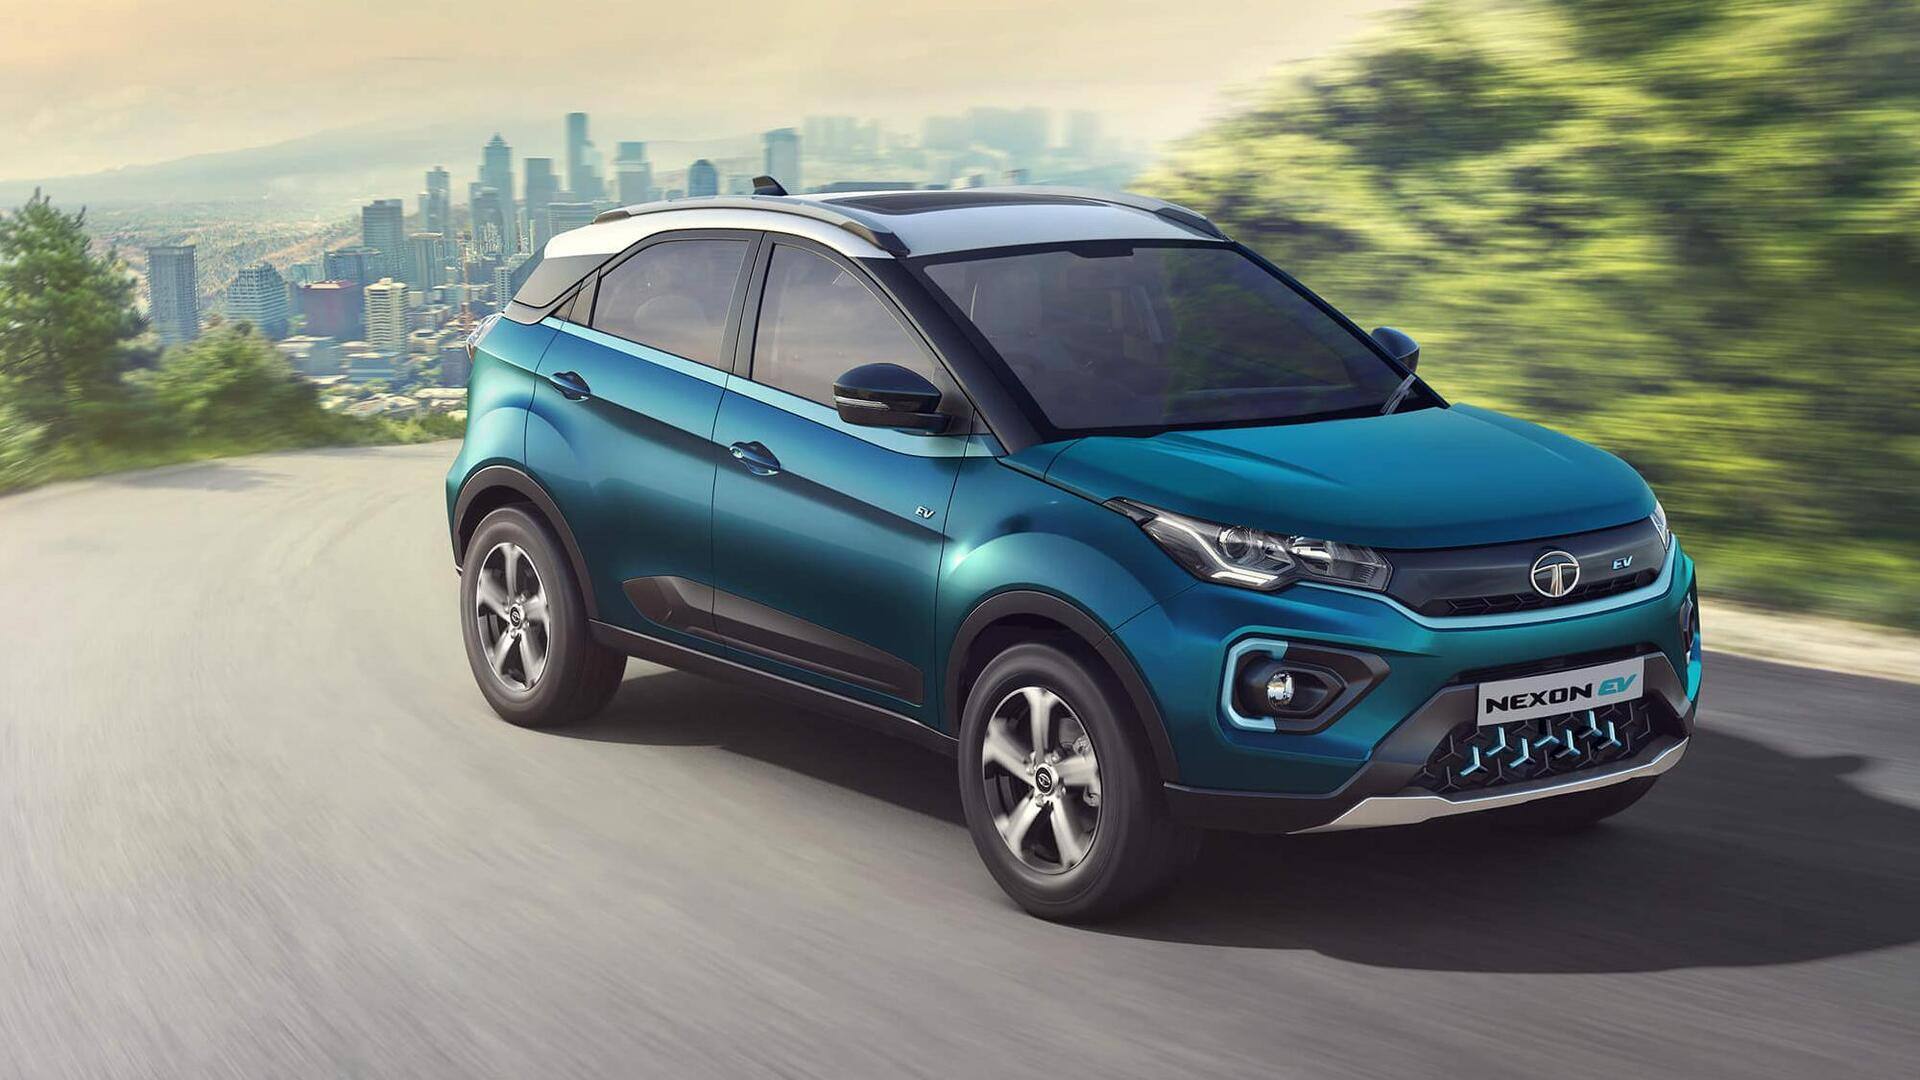 2023 Tata Nexon range is coming soon: What to expect